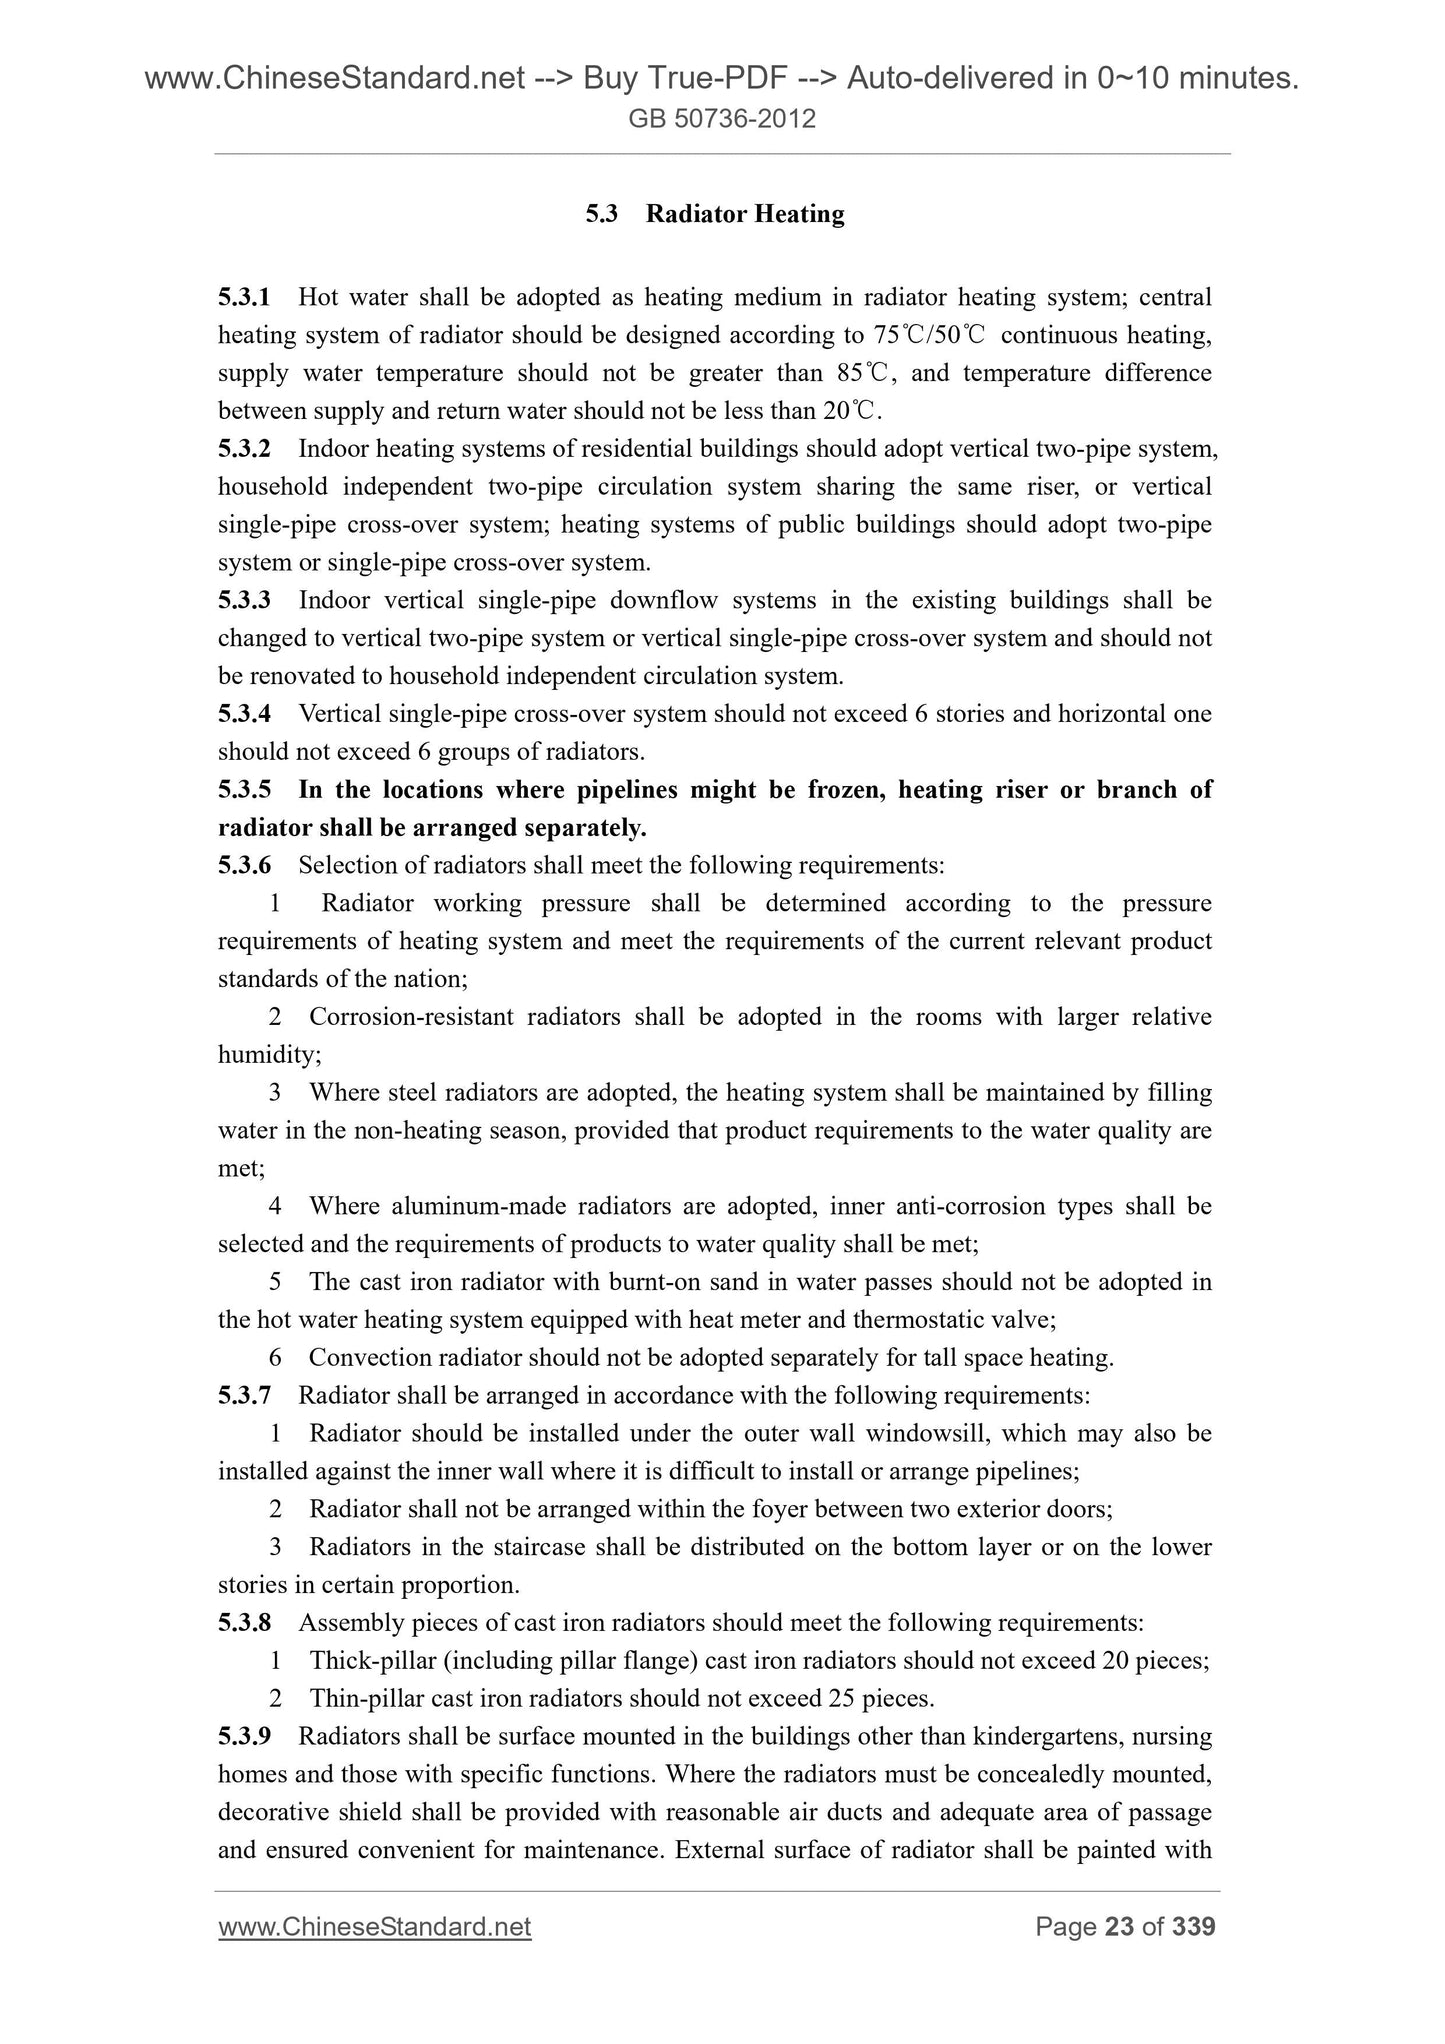 GB 50736-2012 Page 4